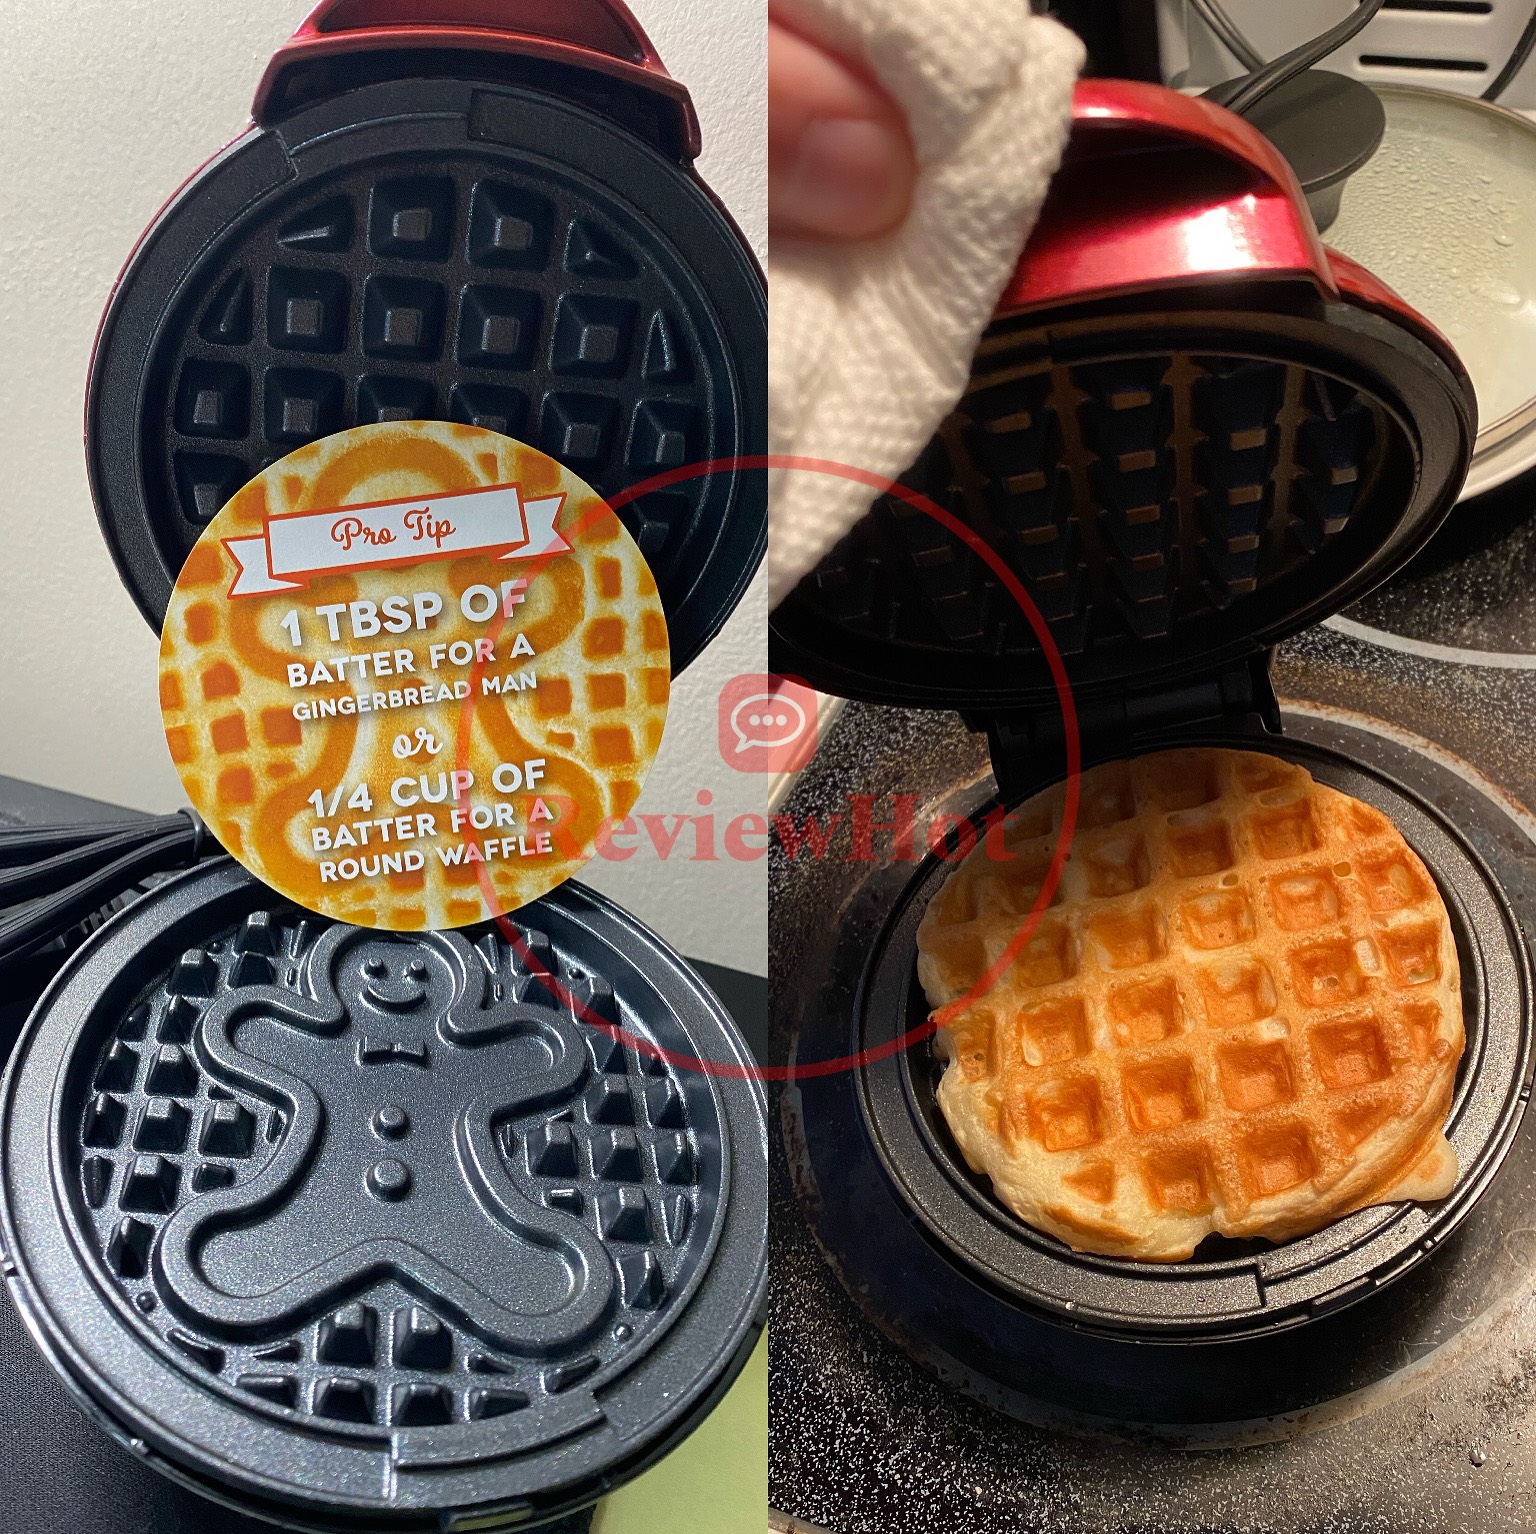 The interior design of the waffle maker and a waffle I made.